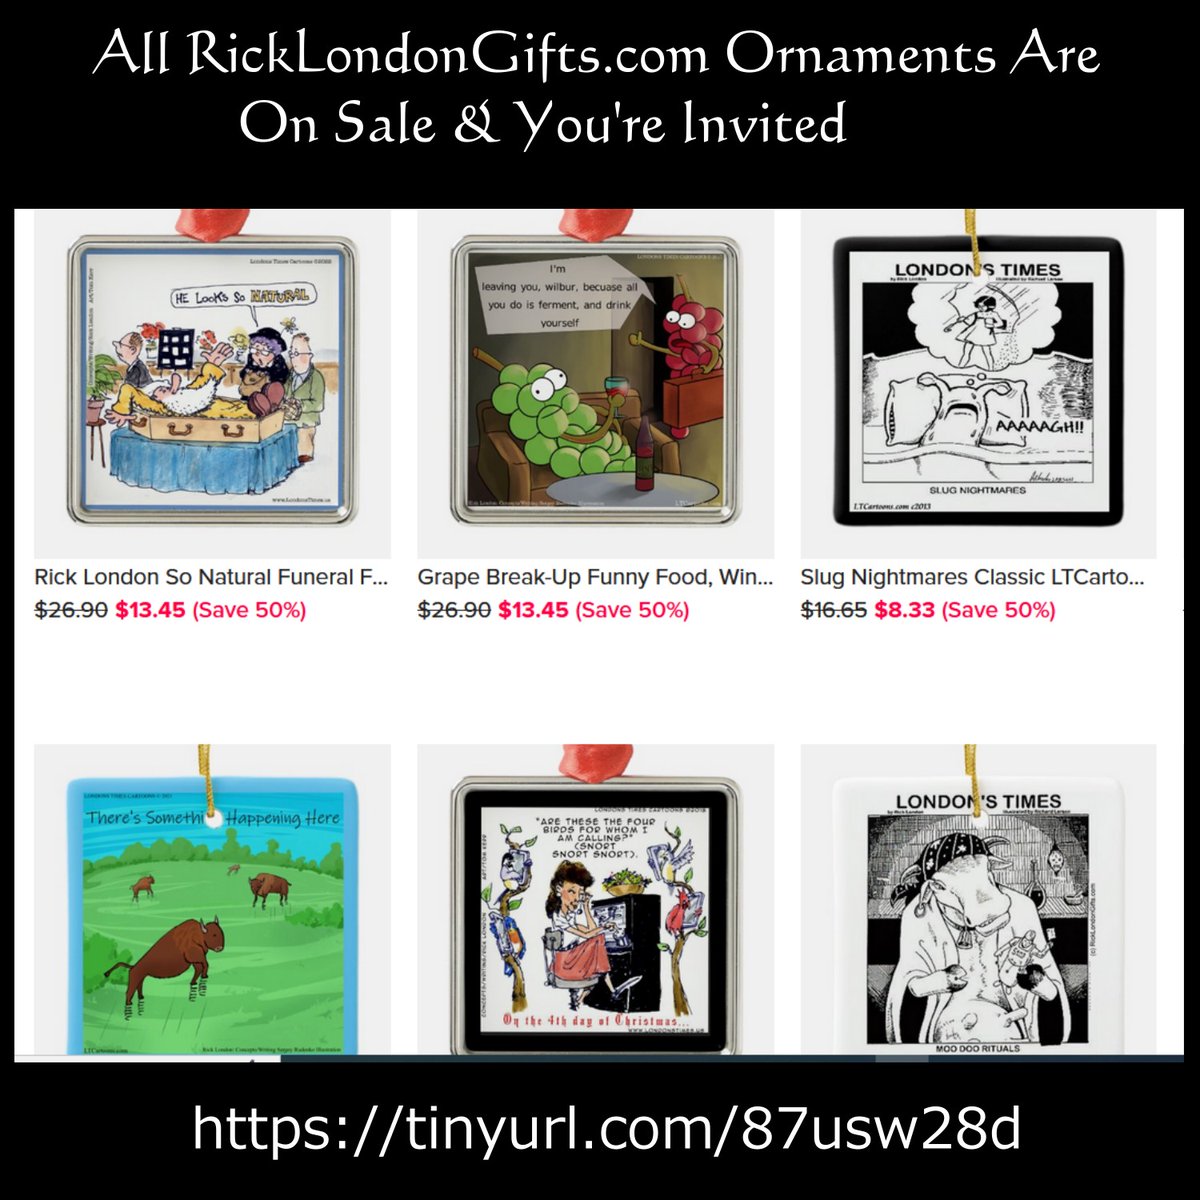 Up to 40% off #SitewideSale Google #1 ranked #funniest  @RickLondon #Giftshop #freepersonalization #shipsworldwide #funnygifts #funnycards #Shop from #comfort of #home @zazzle #guaranteed Use #code ZAZMAKEITALL @c/o Ends Sun RickLondonGifts.com